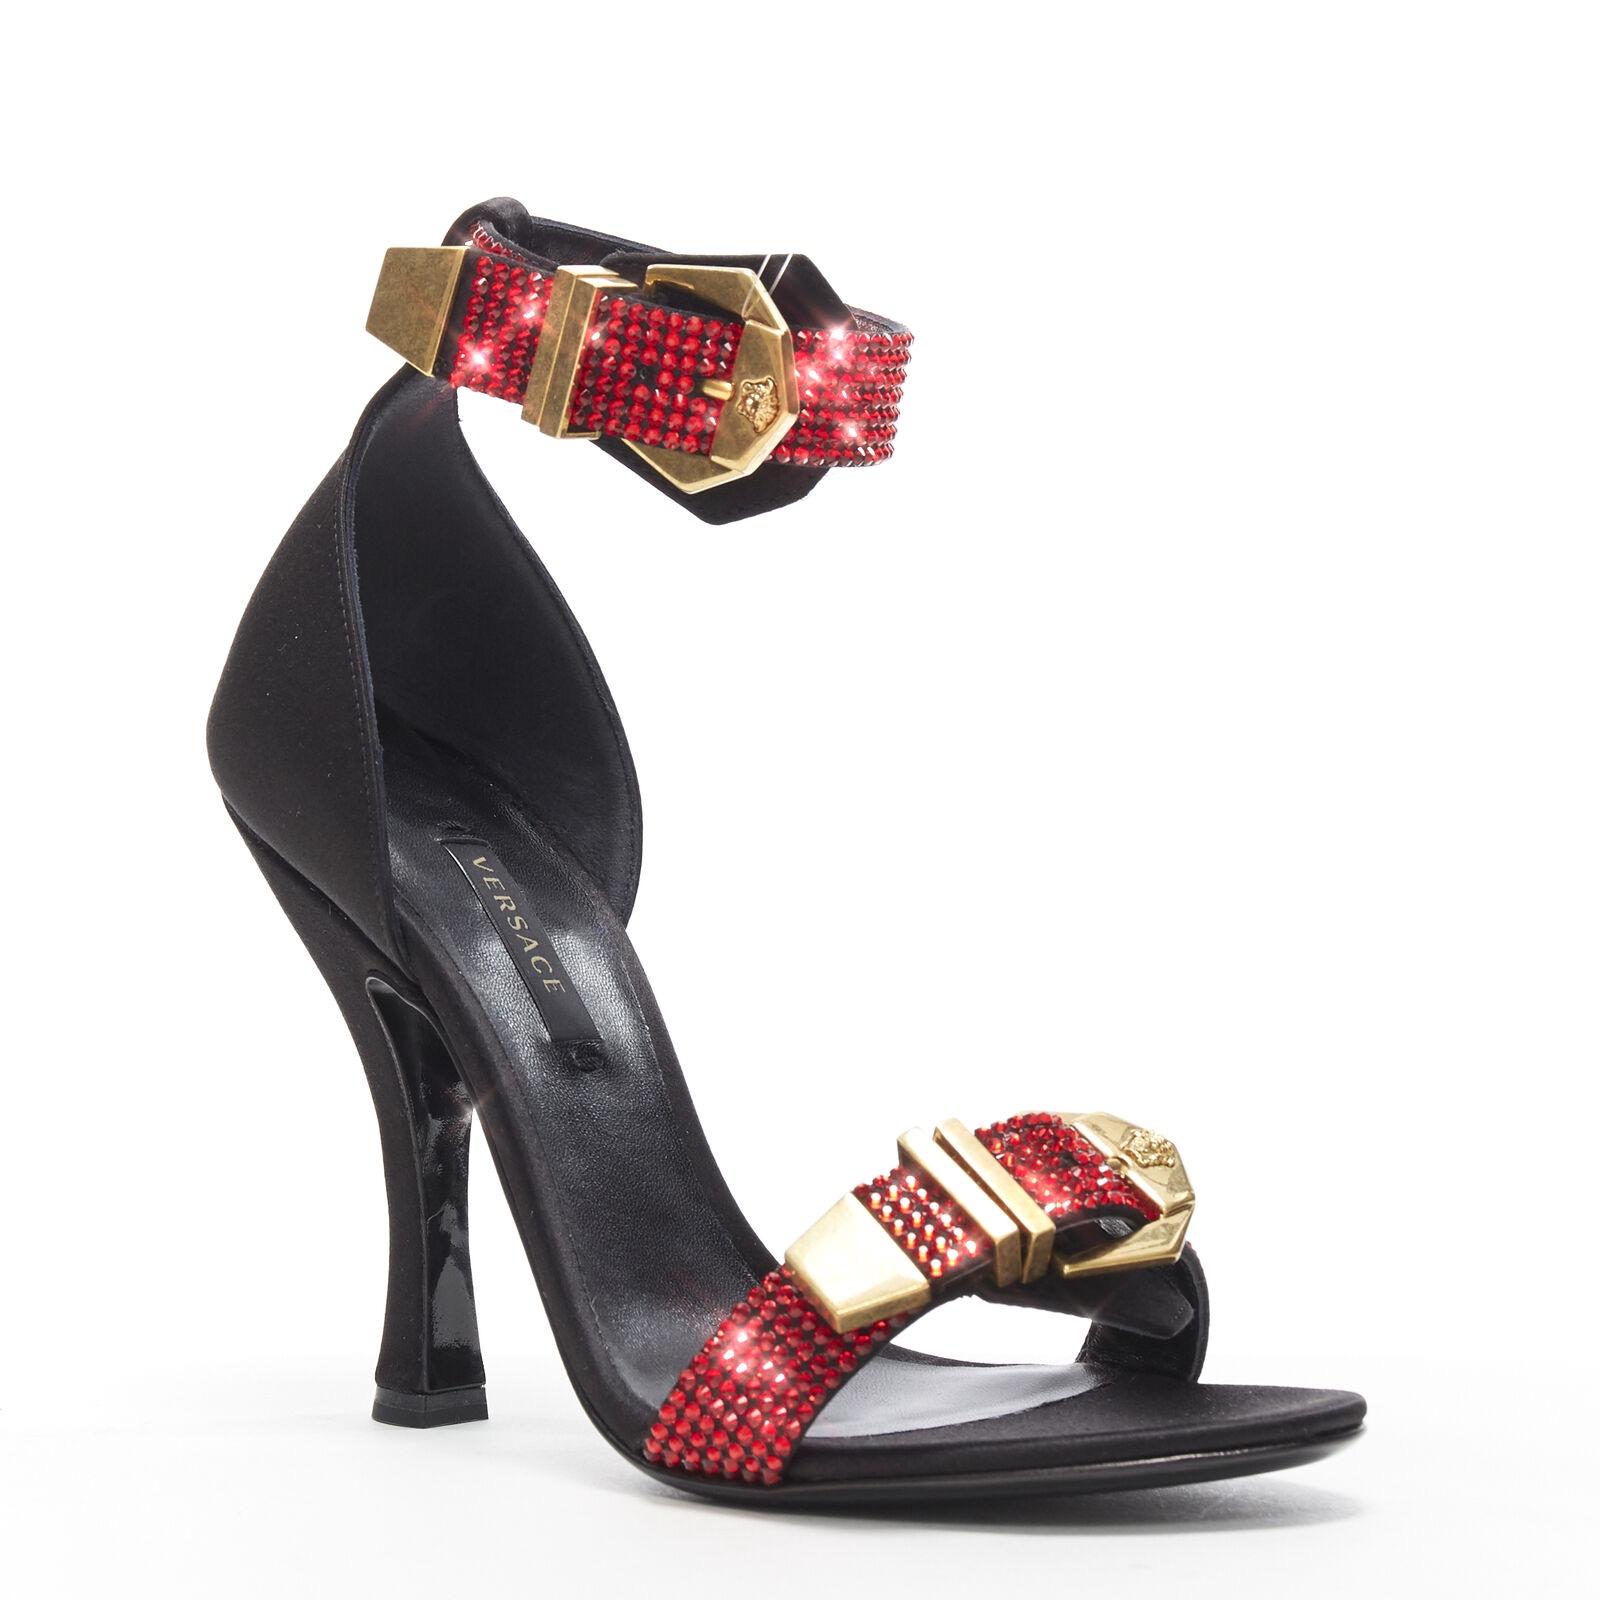 new VERSACE AW18 Runway red strass crystal gold buckle strappy sandal EU37
Brand: Versace
Designer: Donatella Versace
Collection: Fall Winter 2018
Model Name / Style: Crystal heel
Material: Leather
Color: Red
Pattern: Solid
Closure: Buckle
Lining